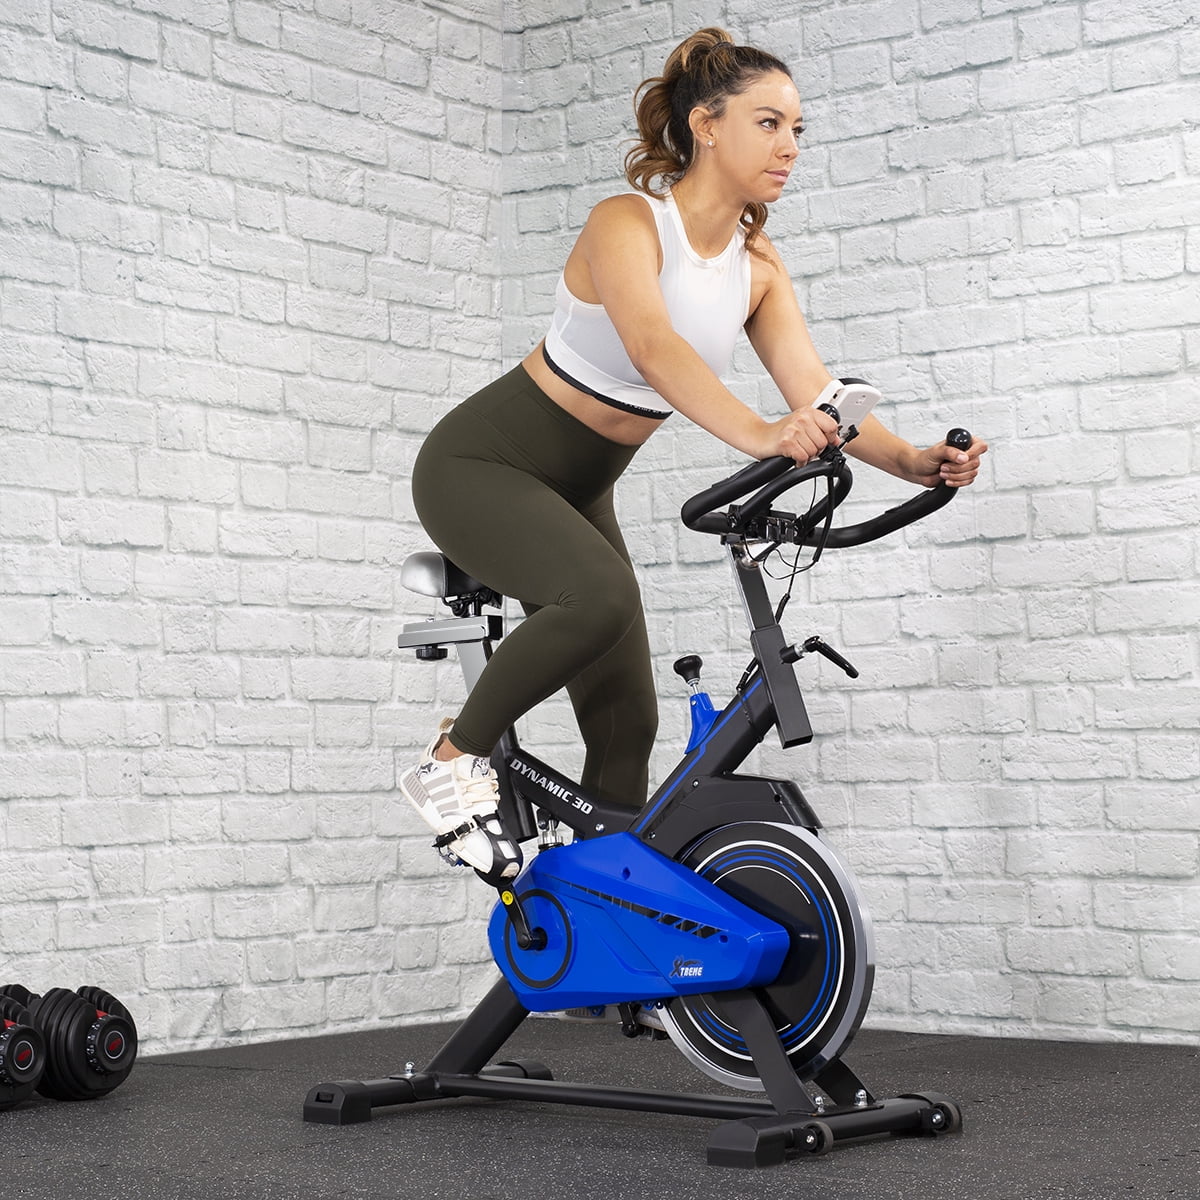 Details about   Indoor Pro Stationary Exercise Bike Bicycle Cardio Workout Fitness w/LED Display 